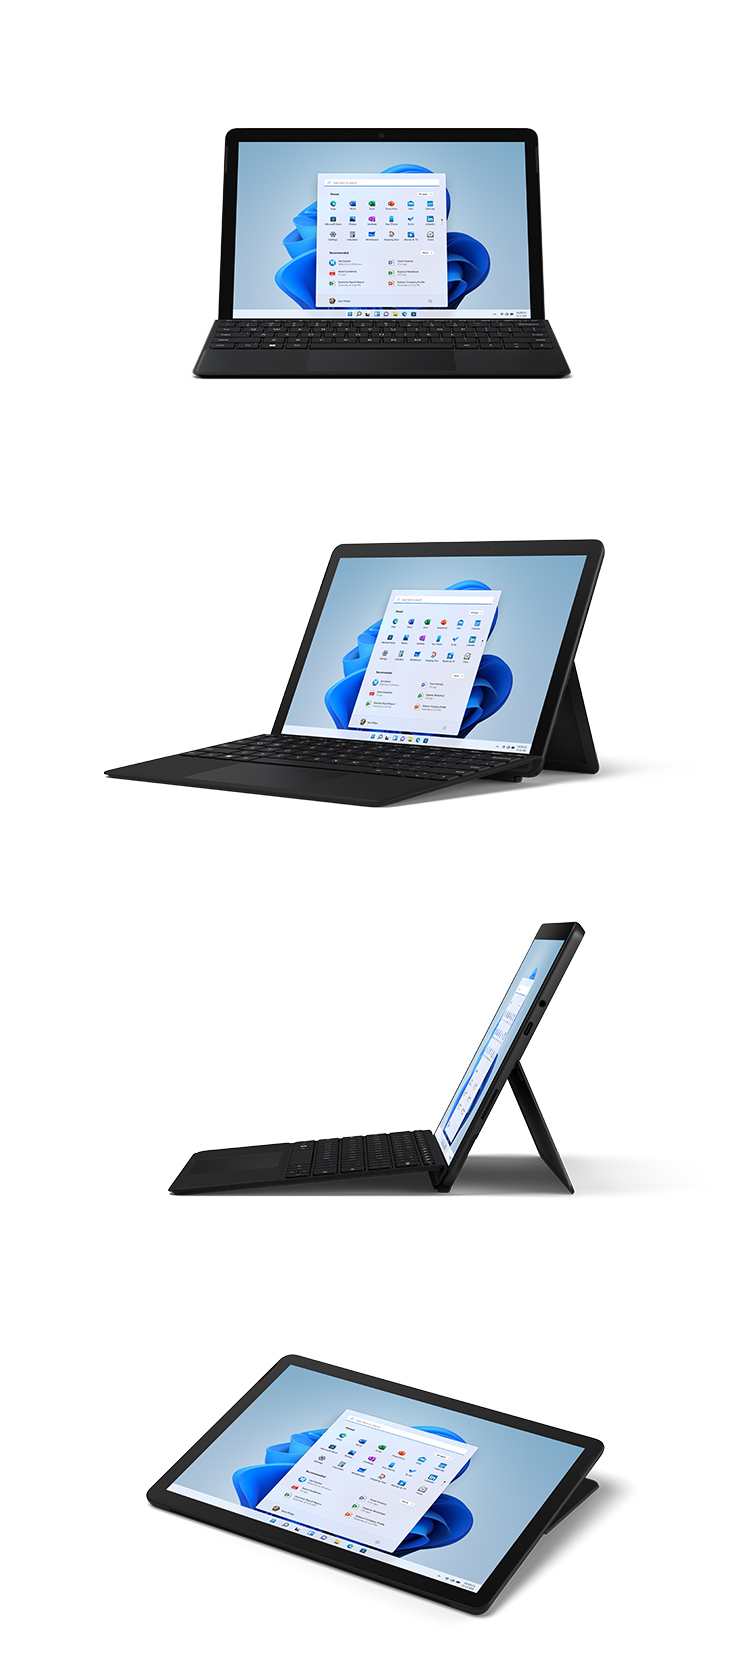 Renders of Surface Go 3 with Black Type Cover from straight on, angled, side-view, and studio mode.